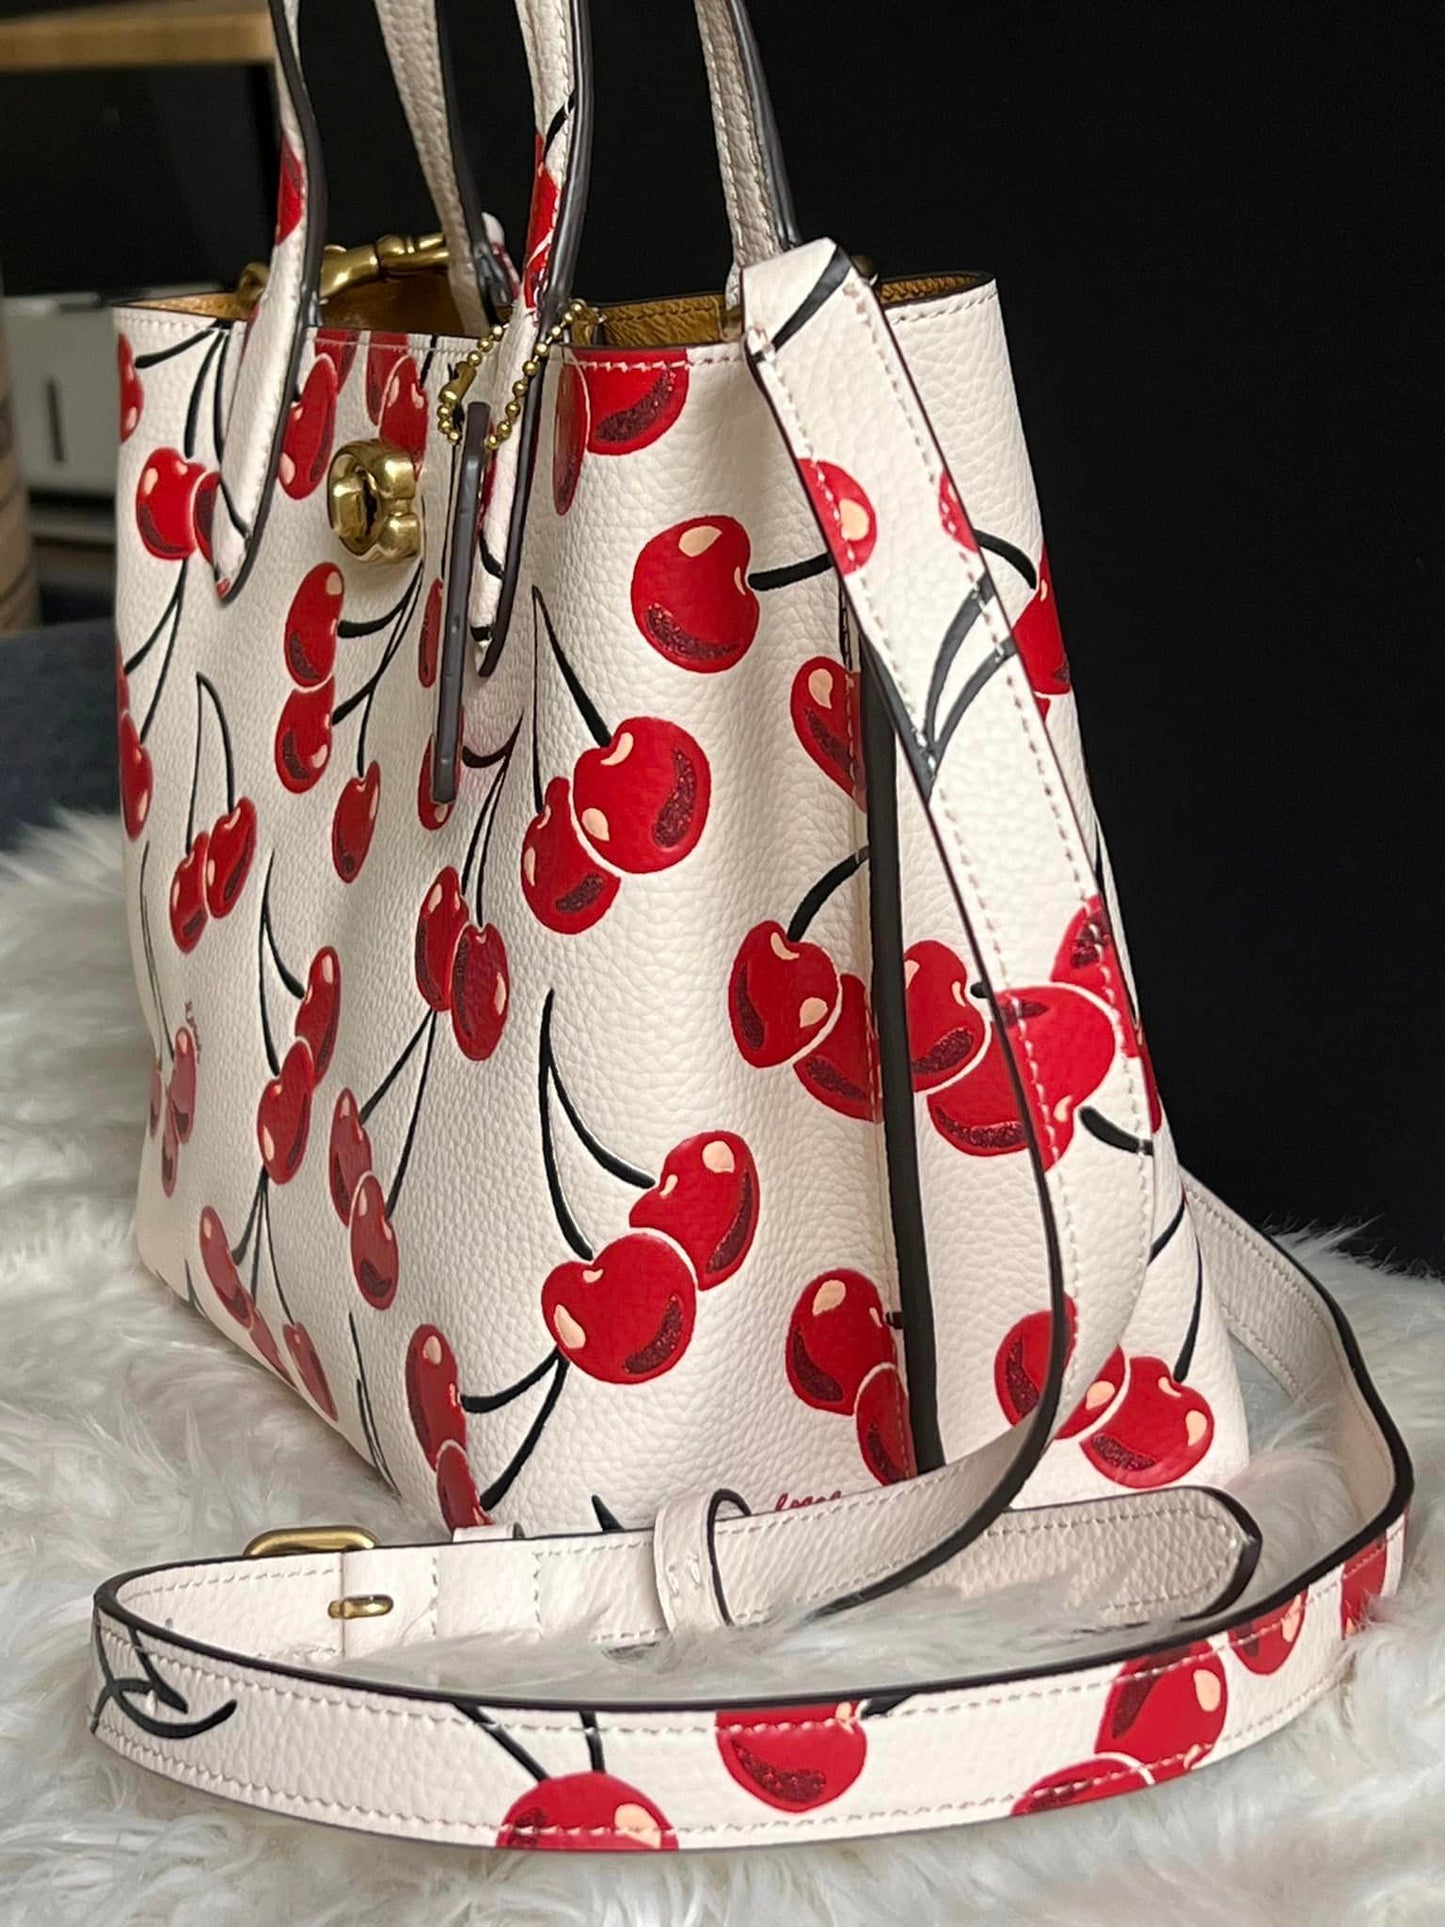 Coach Willow Tote 24 With Cherry Print